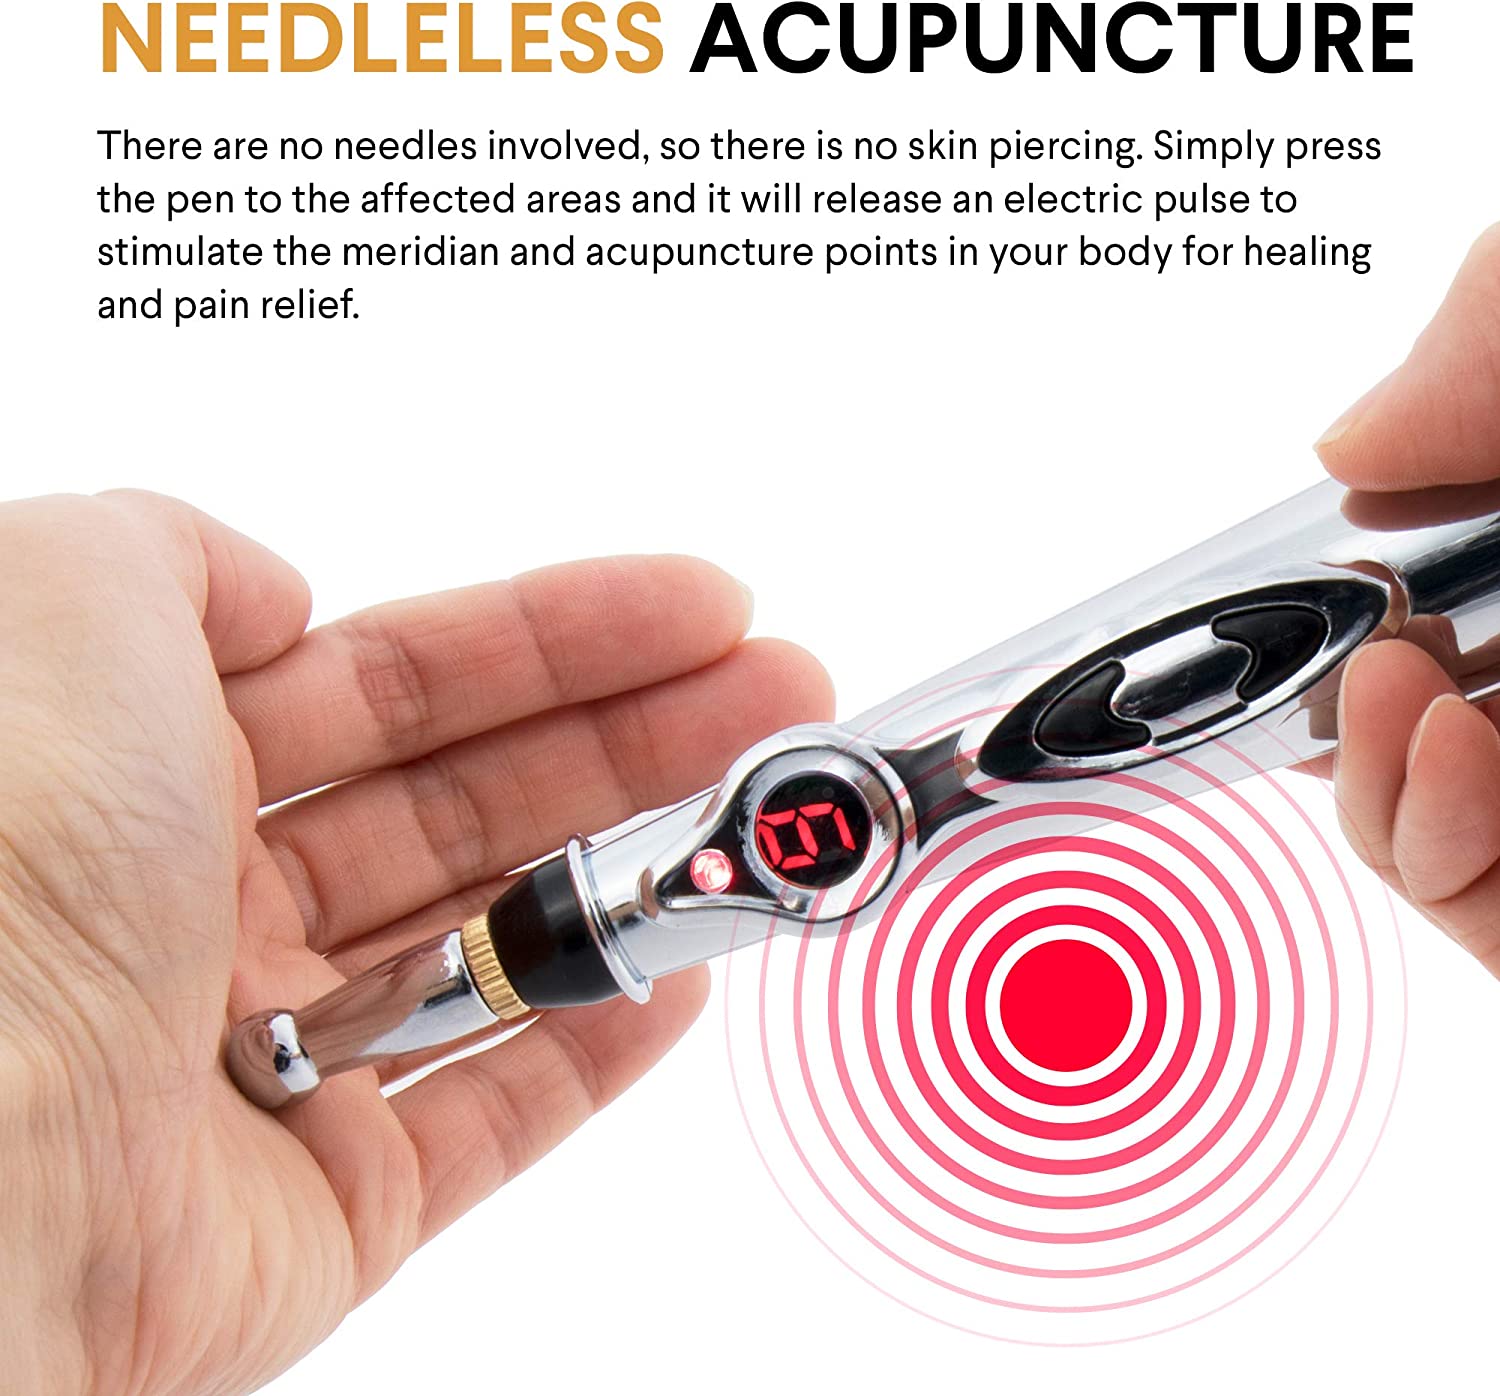 Blitzby 5-in-1 Electronic Acupuncture Pen, Meridian Energy Pen for Pain Relief (NC)